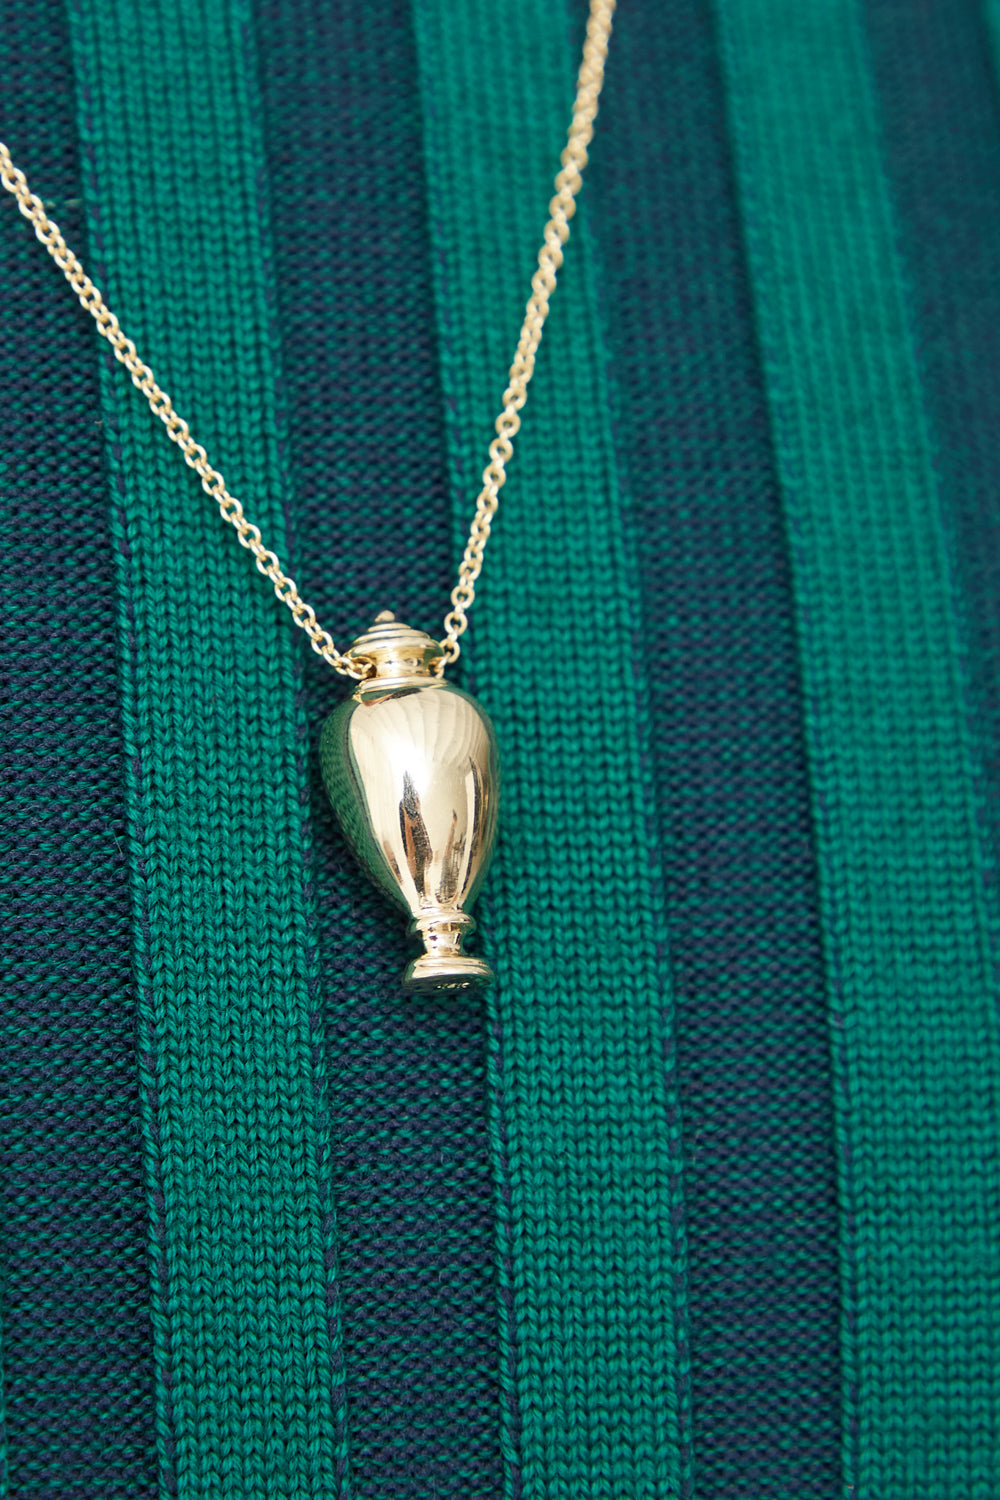 A handmade Kathryn Bentley 14K yellow gold urn pendant on a green striped sweater, crafted in Los Angeles.